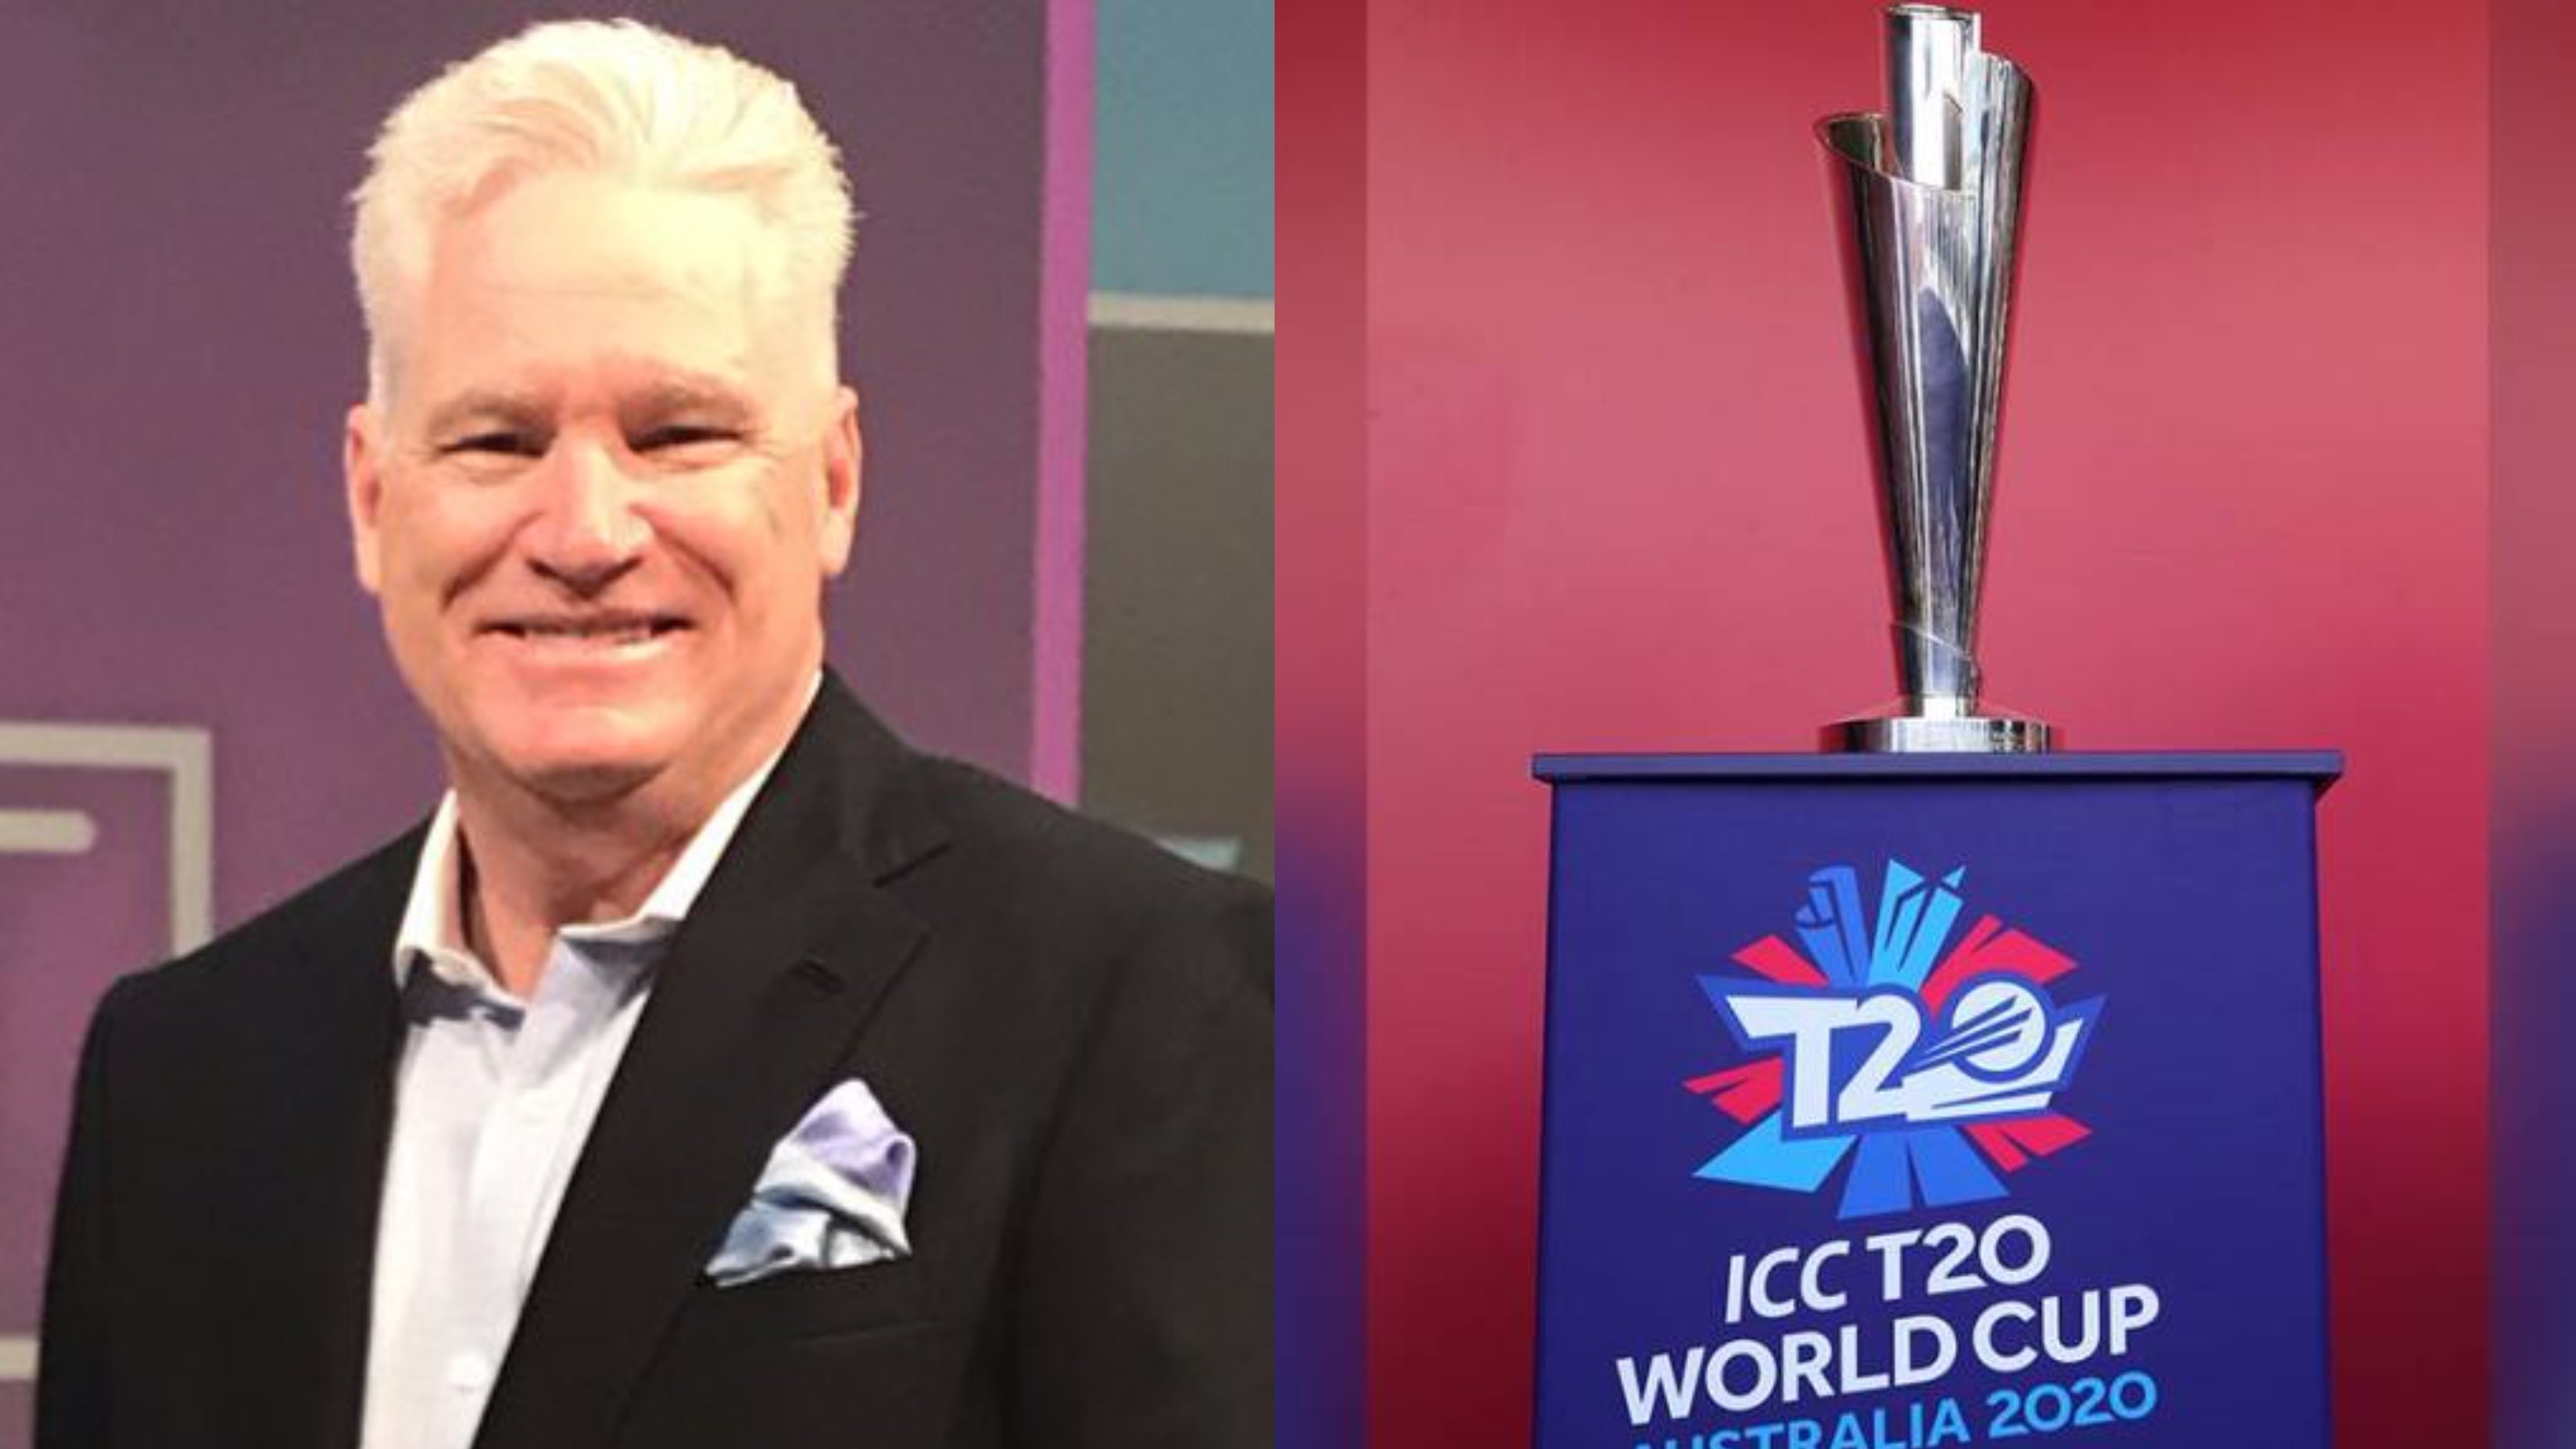 Dean Jones suggests New Zealand as an alternate option for T20 World Cup 2020 